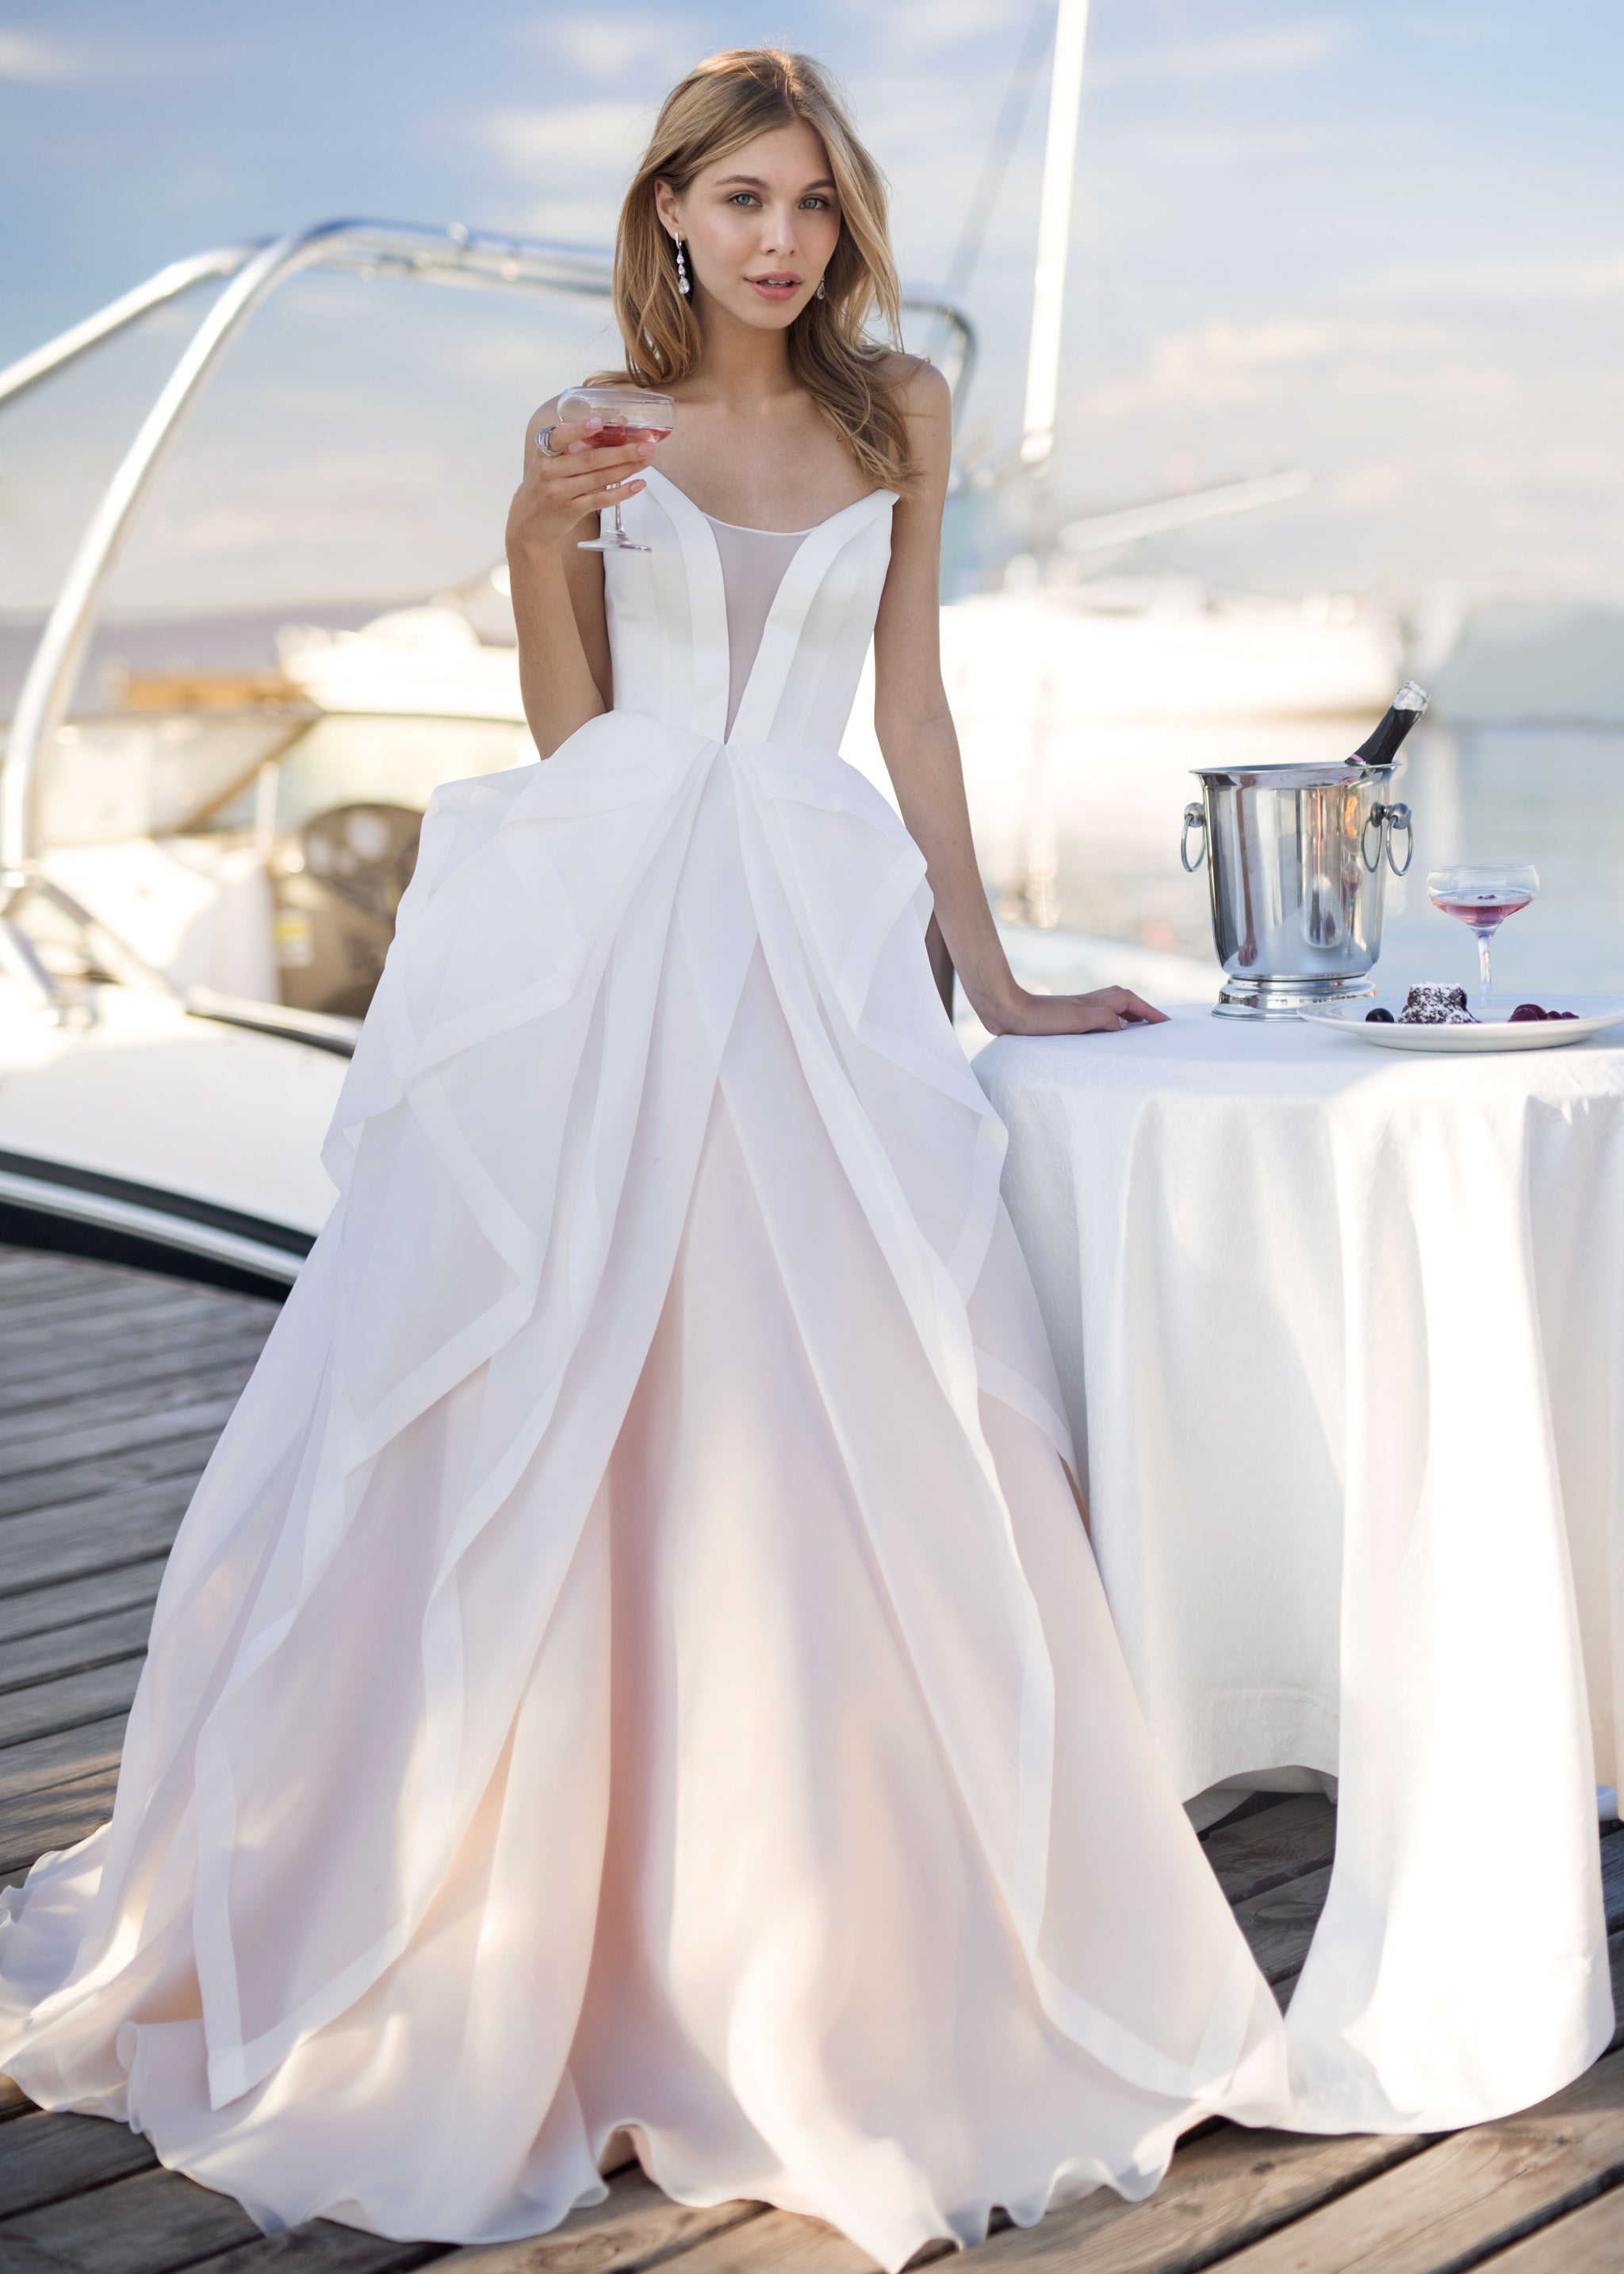 Wedding Dresses - 100's Of Bridal Gowns From €699 to €999| wed2b